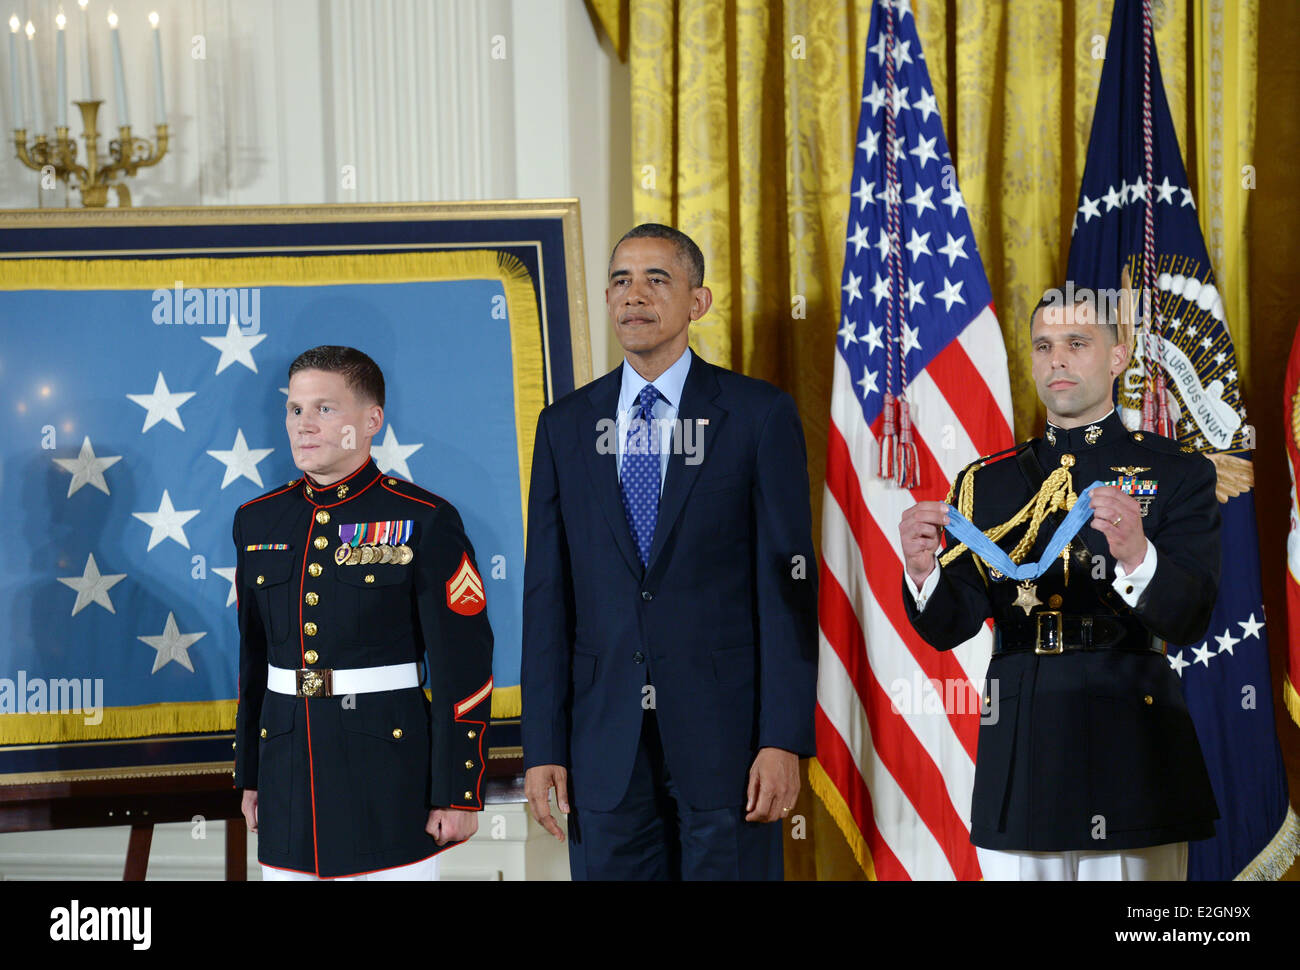 Washington, DC, USA. 19th June, 2014. U.S. President Barack Obama (C) stands at a ceremony for awarding William 'Kyle' Carpenter (L) with the Medal of Honor in the East Room of the White House in Washington, DC, the United States, on June 19, 2014. Carpenter received the medal for covering a grenade to save fellow Marines during a Taliban attack in November 2010. Carpenter is the eighth living recipient chosen for the highest military award. Credit:  Yin Bogu/Xinhua/Alamy Live News Stock Photo